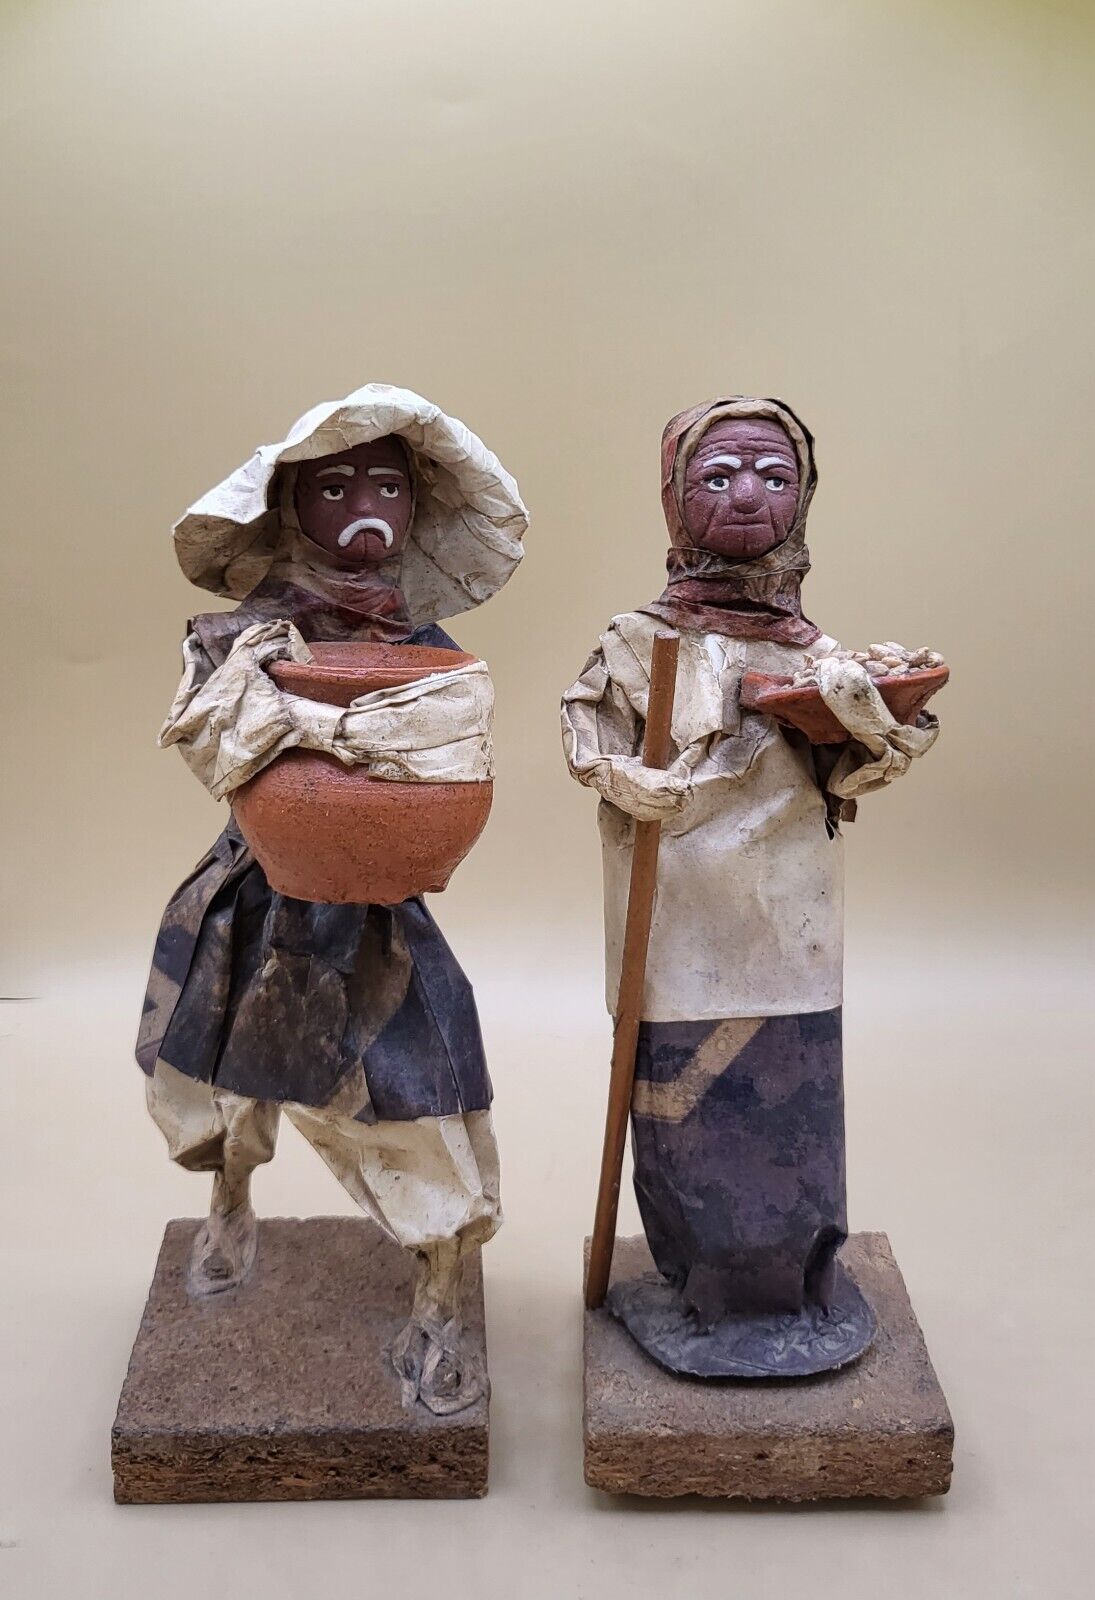 Vintage Paper Mache Folk Art Figurines, man and woman ~ Pair Made in Mexico